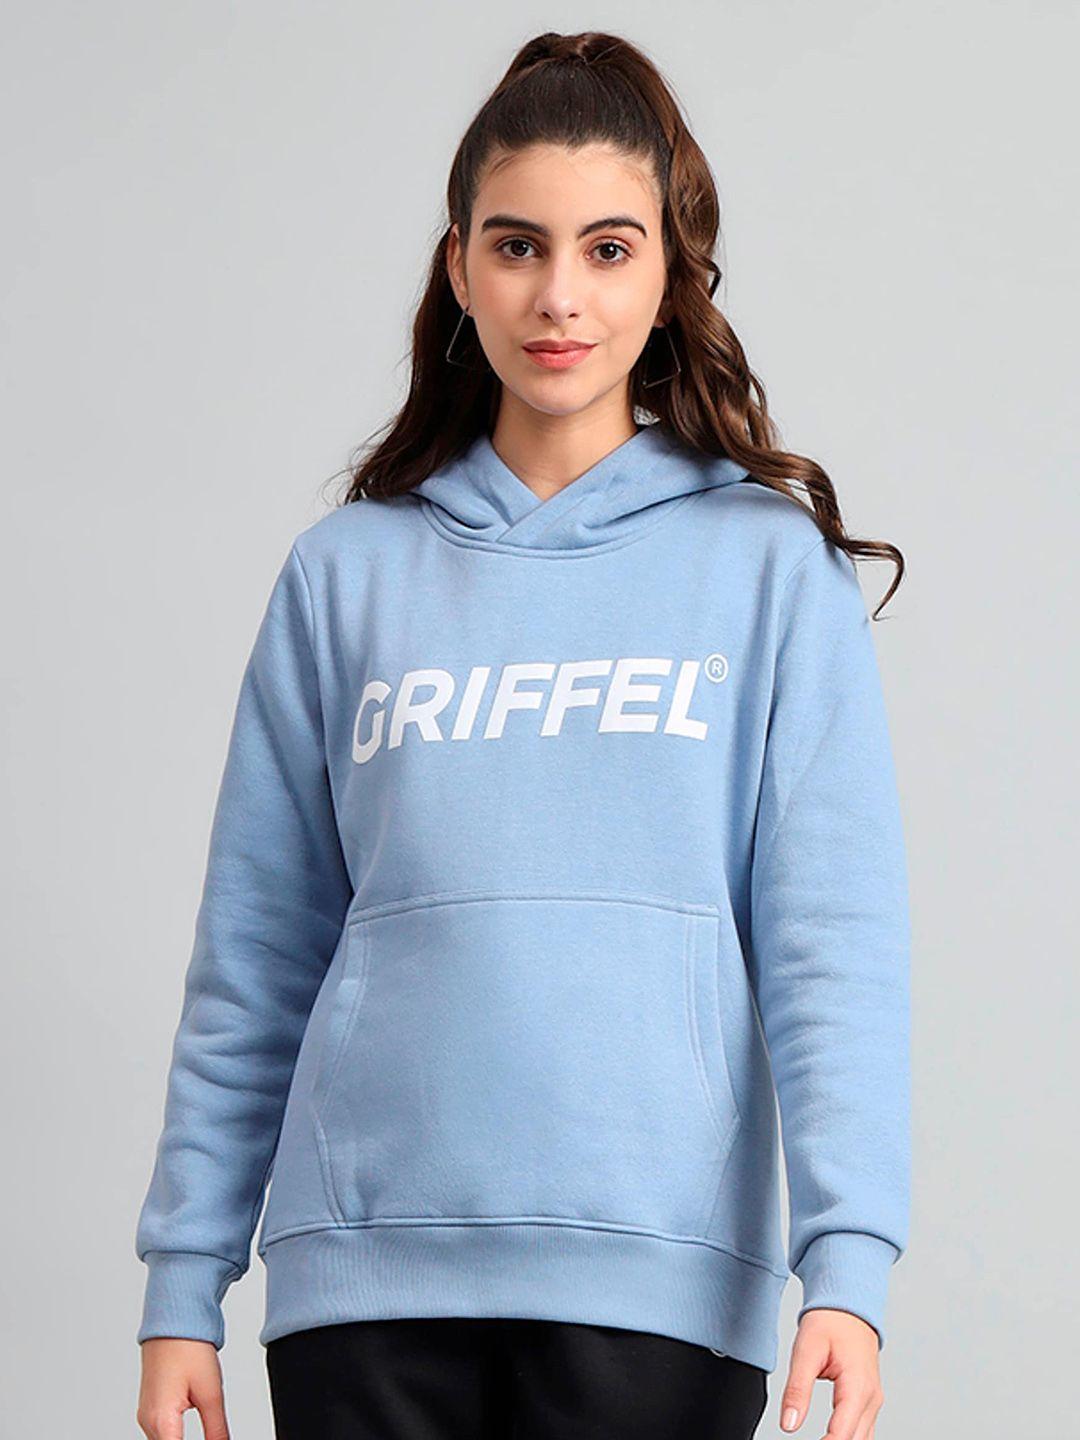 GRIFFEL Typography Printed Hooded Pullover